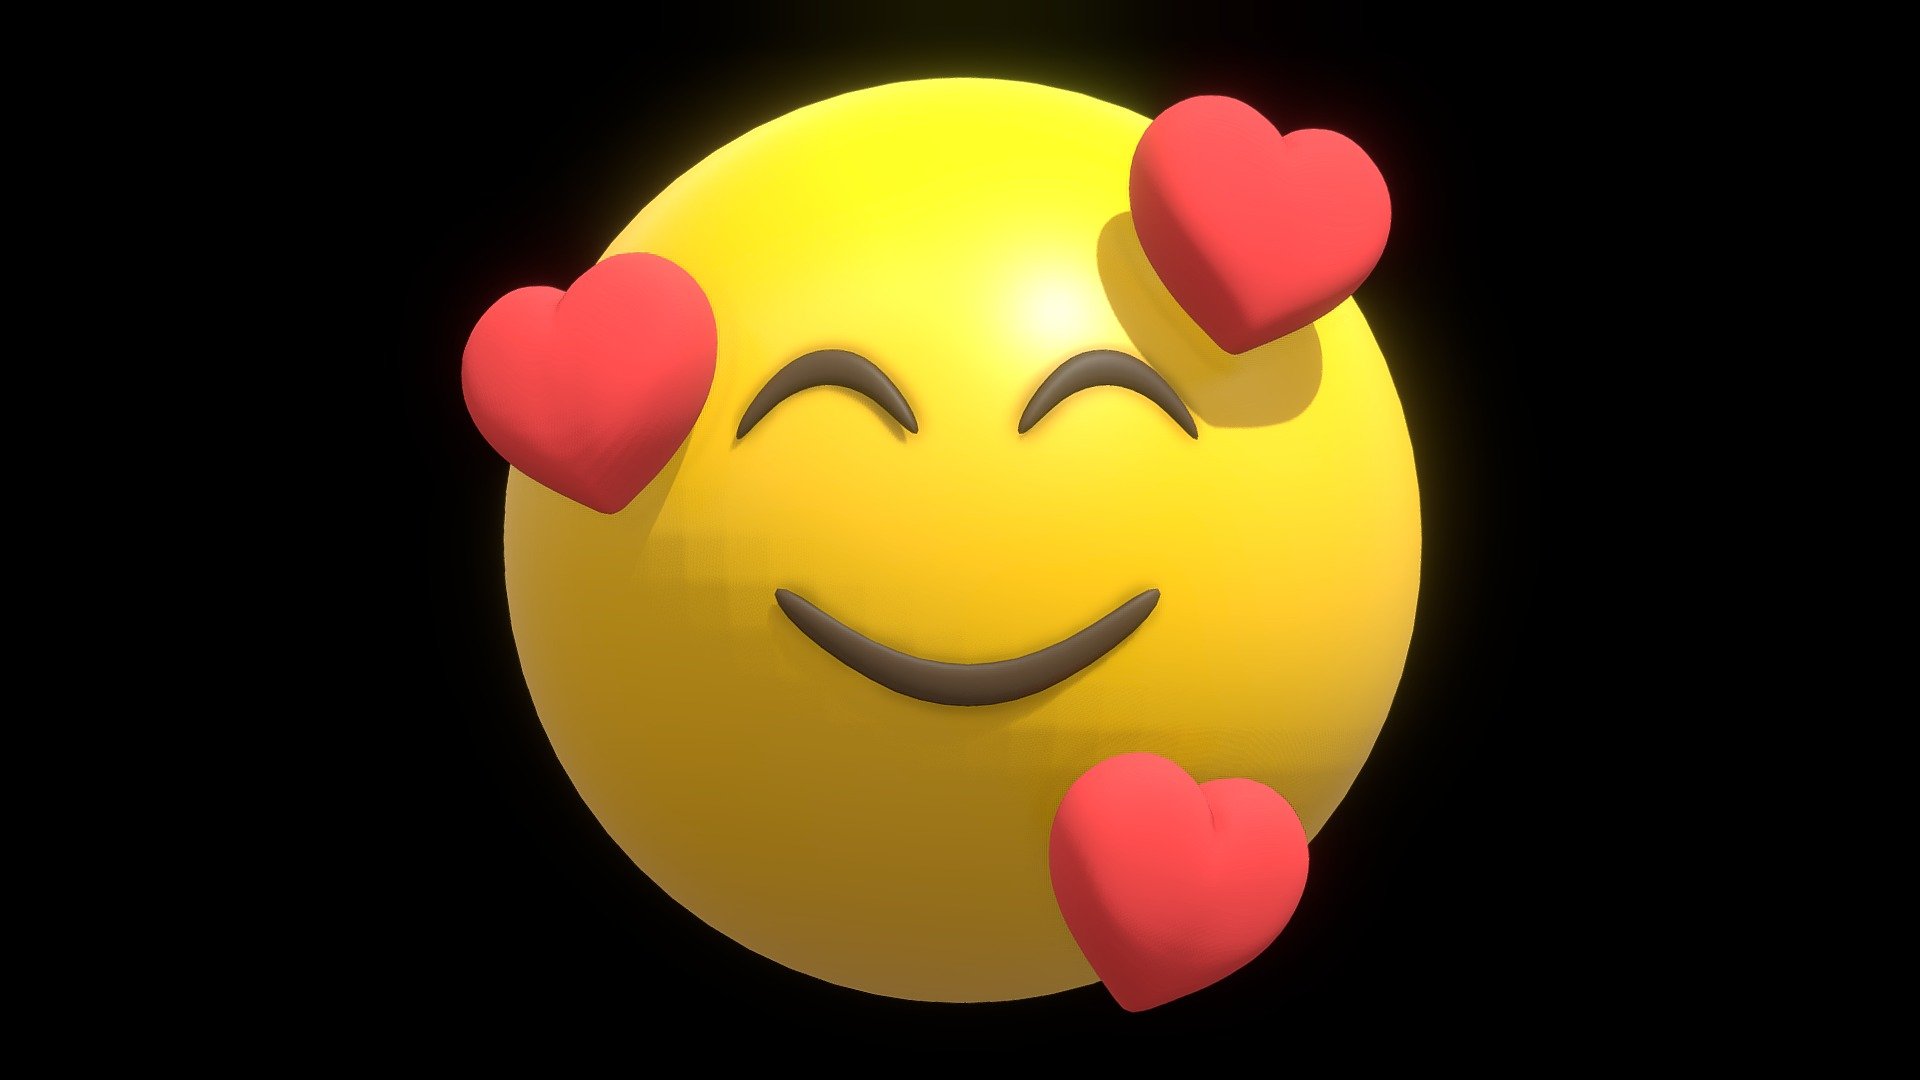 Feeling Loved Yellow Ball Emoticon or Emoji 3D Model Made in Blender 3.3.1

This model does include a TEXTURE, DIFFUSE and ROUGHNESS MAP, but if you want to change the color you can change it in the blend file, just use the principled bsdf and play with the rough and base color parameter

in the blender file i just included the lighting setting for rendering just like the preview image - Feeling Loved Yellow Ball Emoticon or Smiley - Buy Royalty Free 3D model by pakyucangkun 3d model